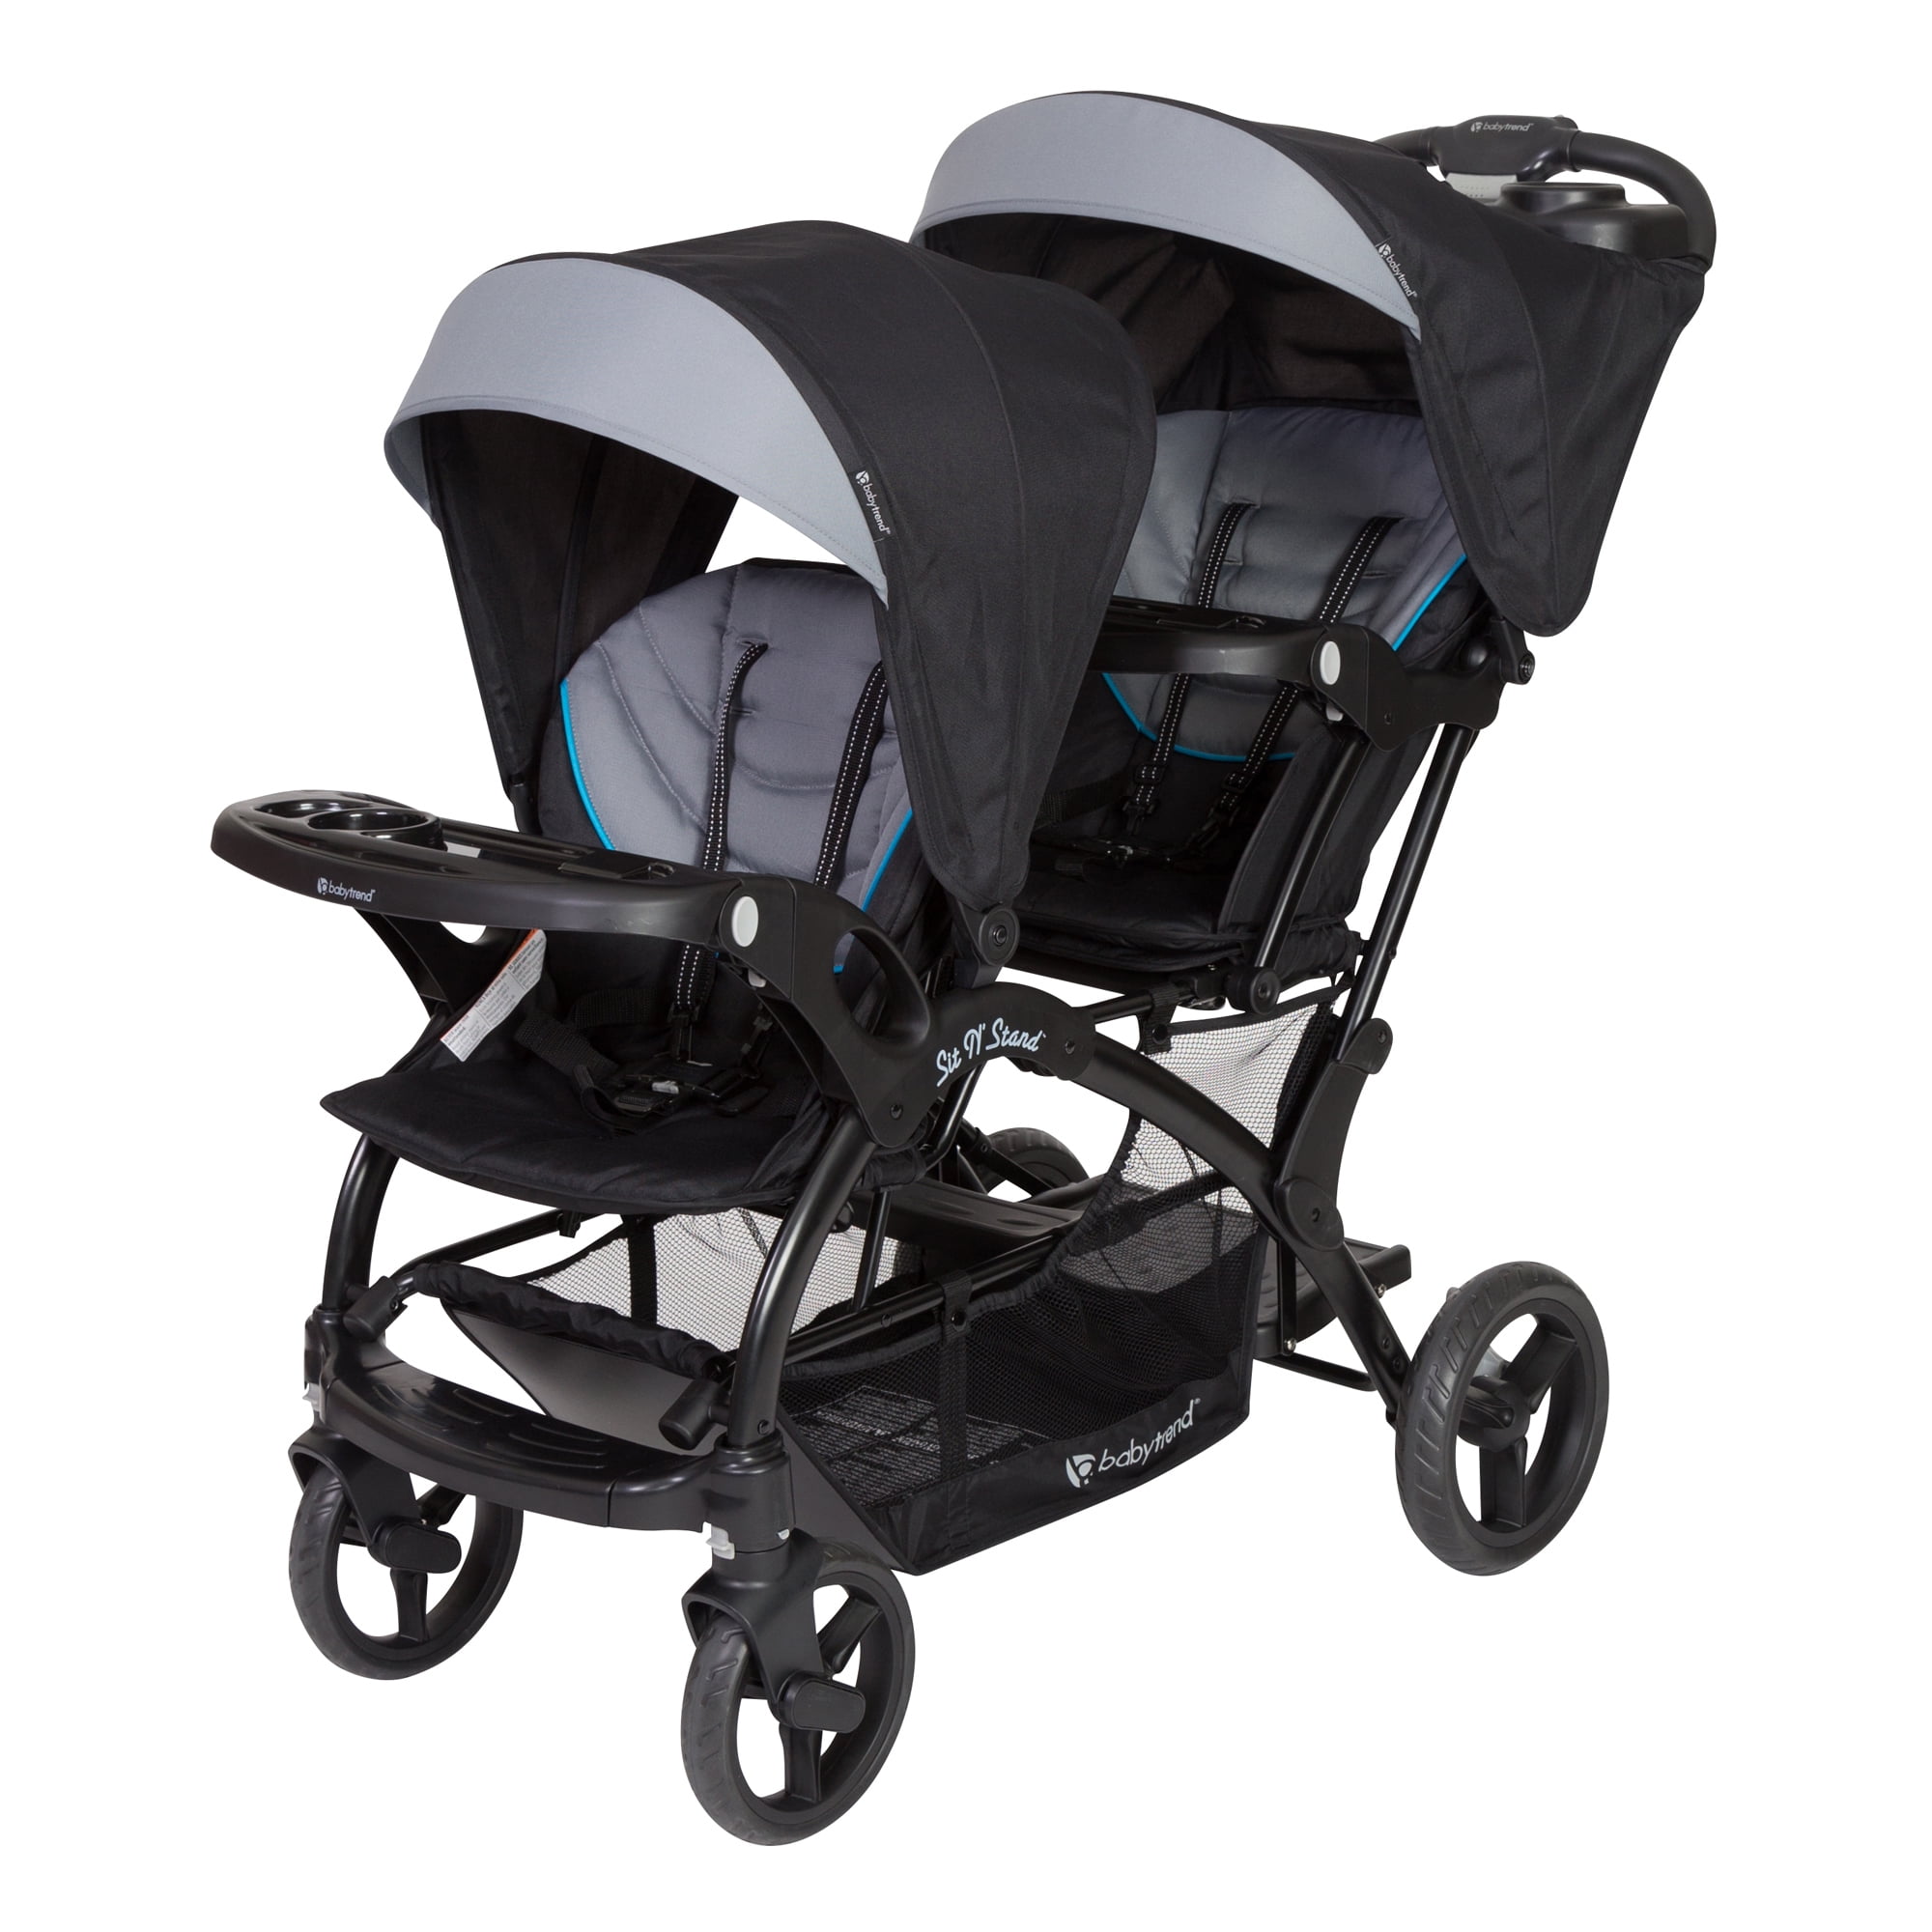 graco blox stroller review